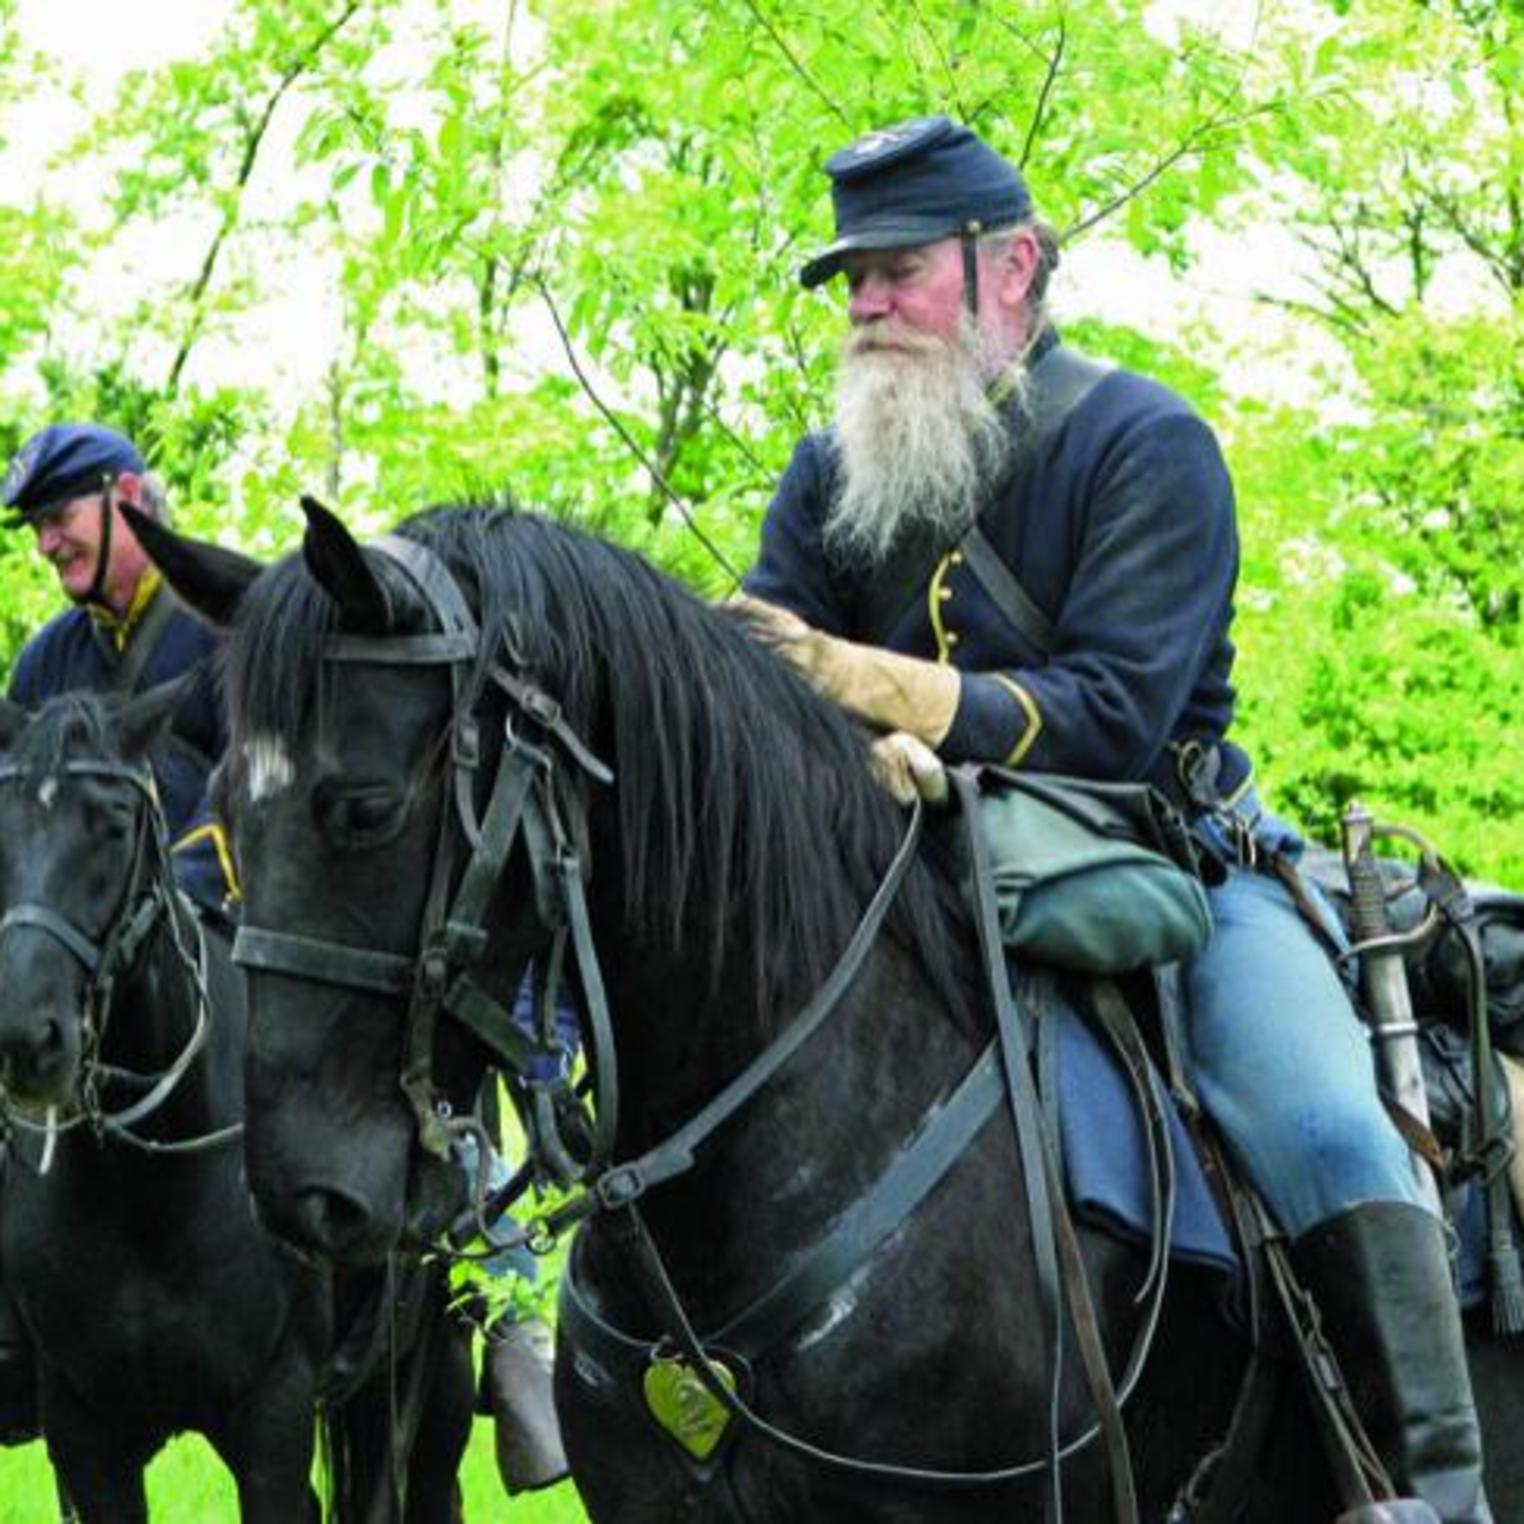 Civil War reenactment at Army Heritage Days at the U.S. Army Heritage & Education Center